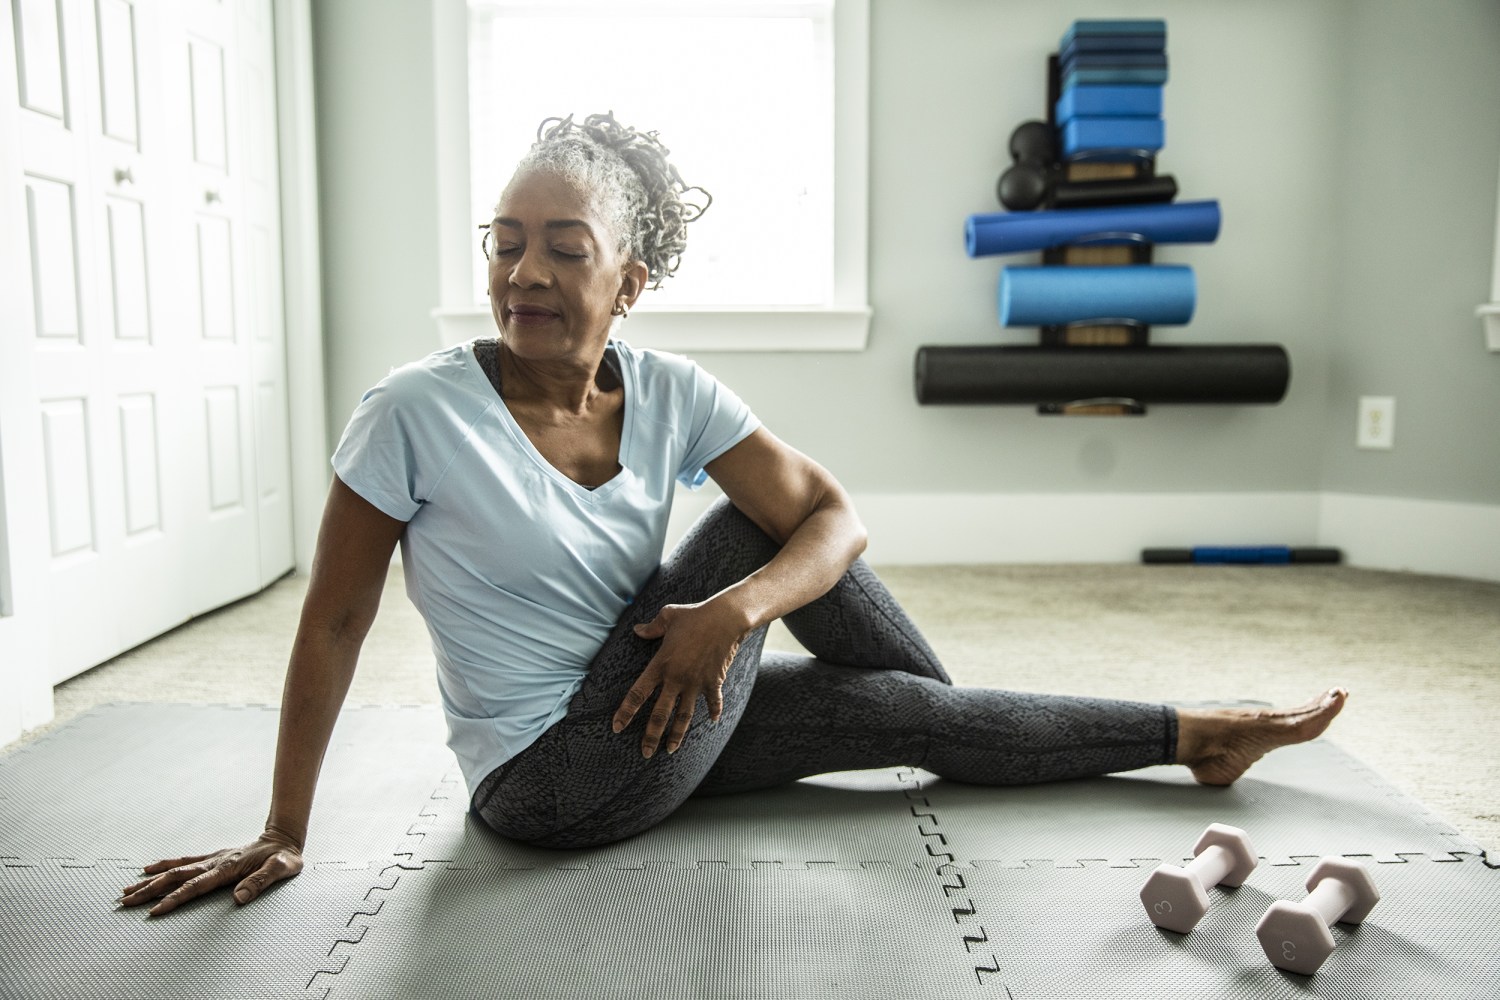 Stretching for Seniors: Improve Mobility and Flexibility